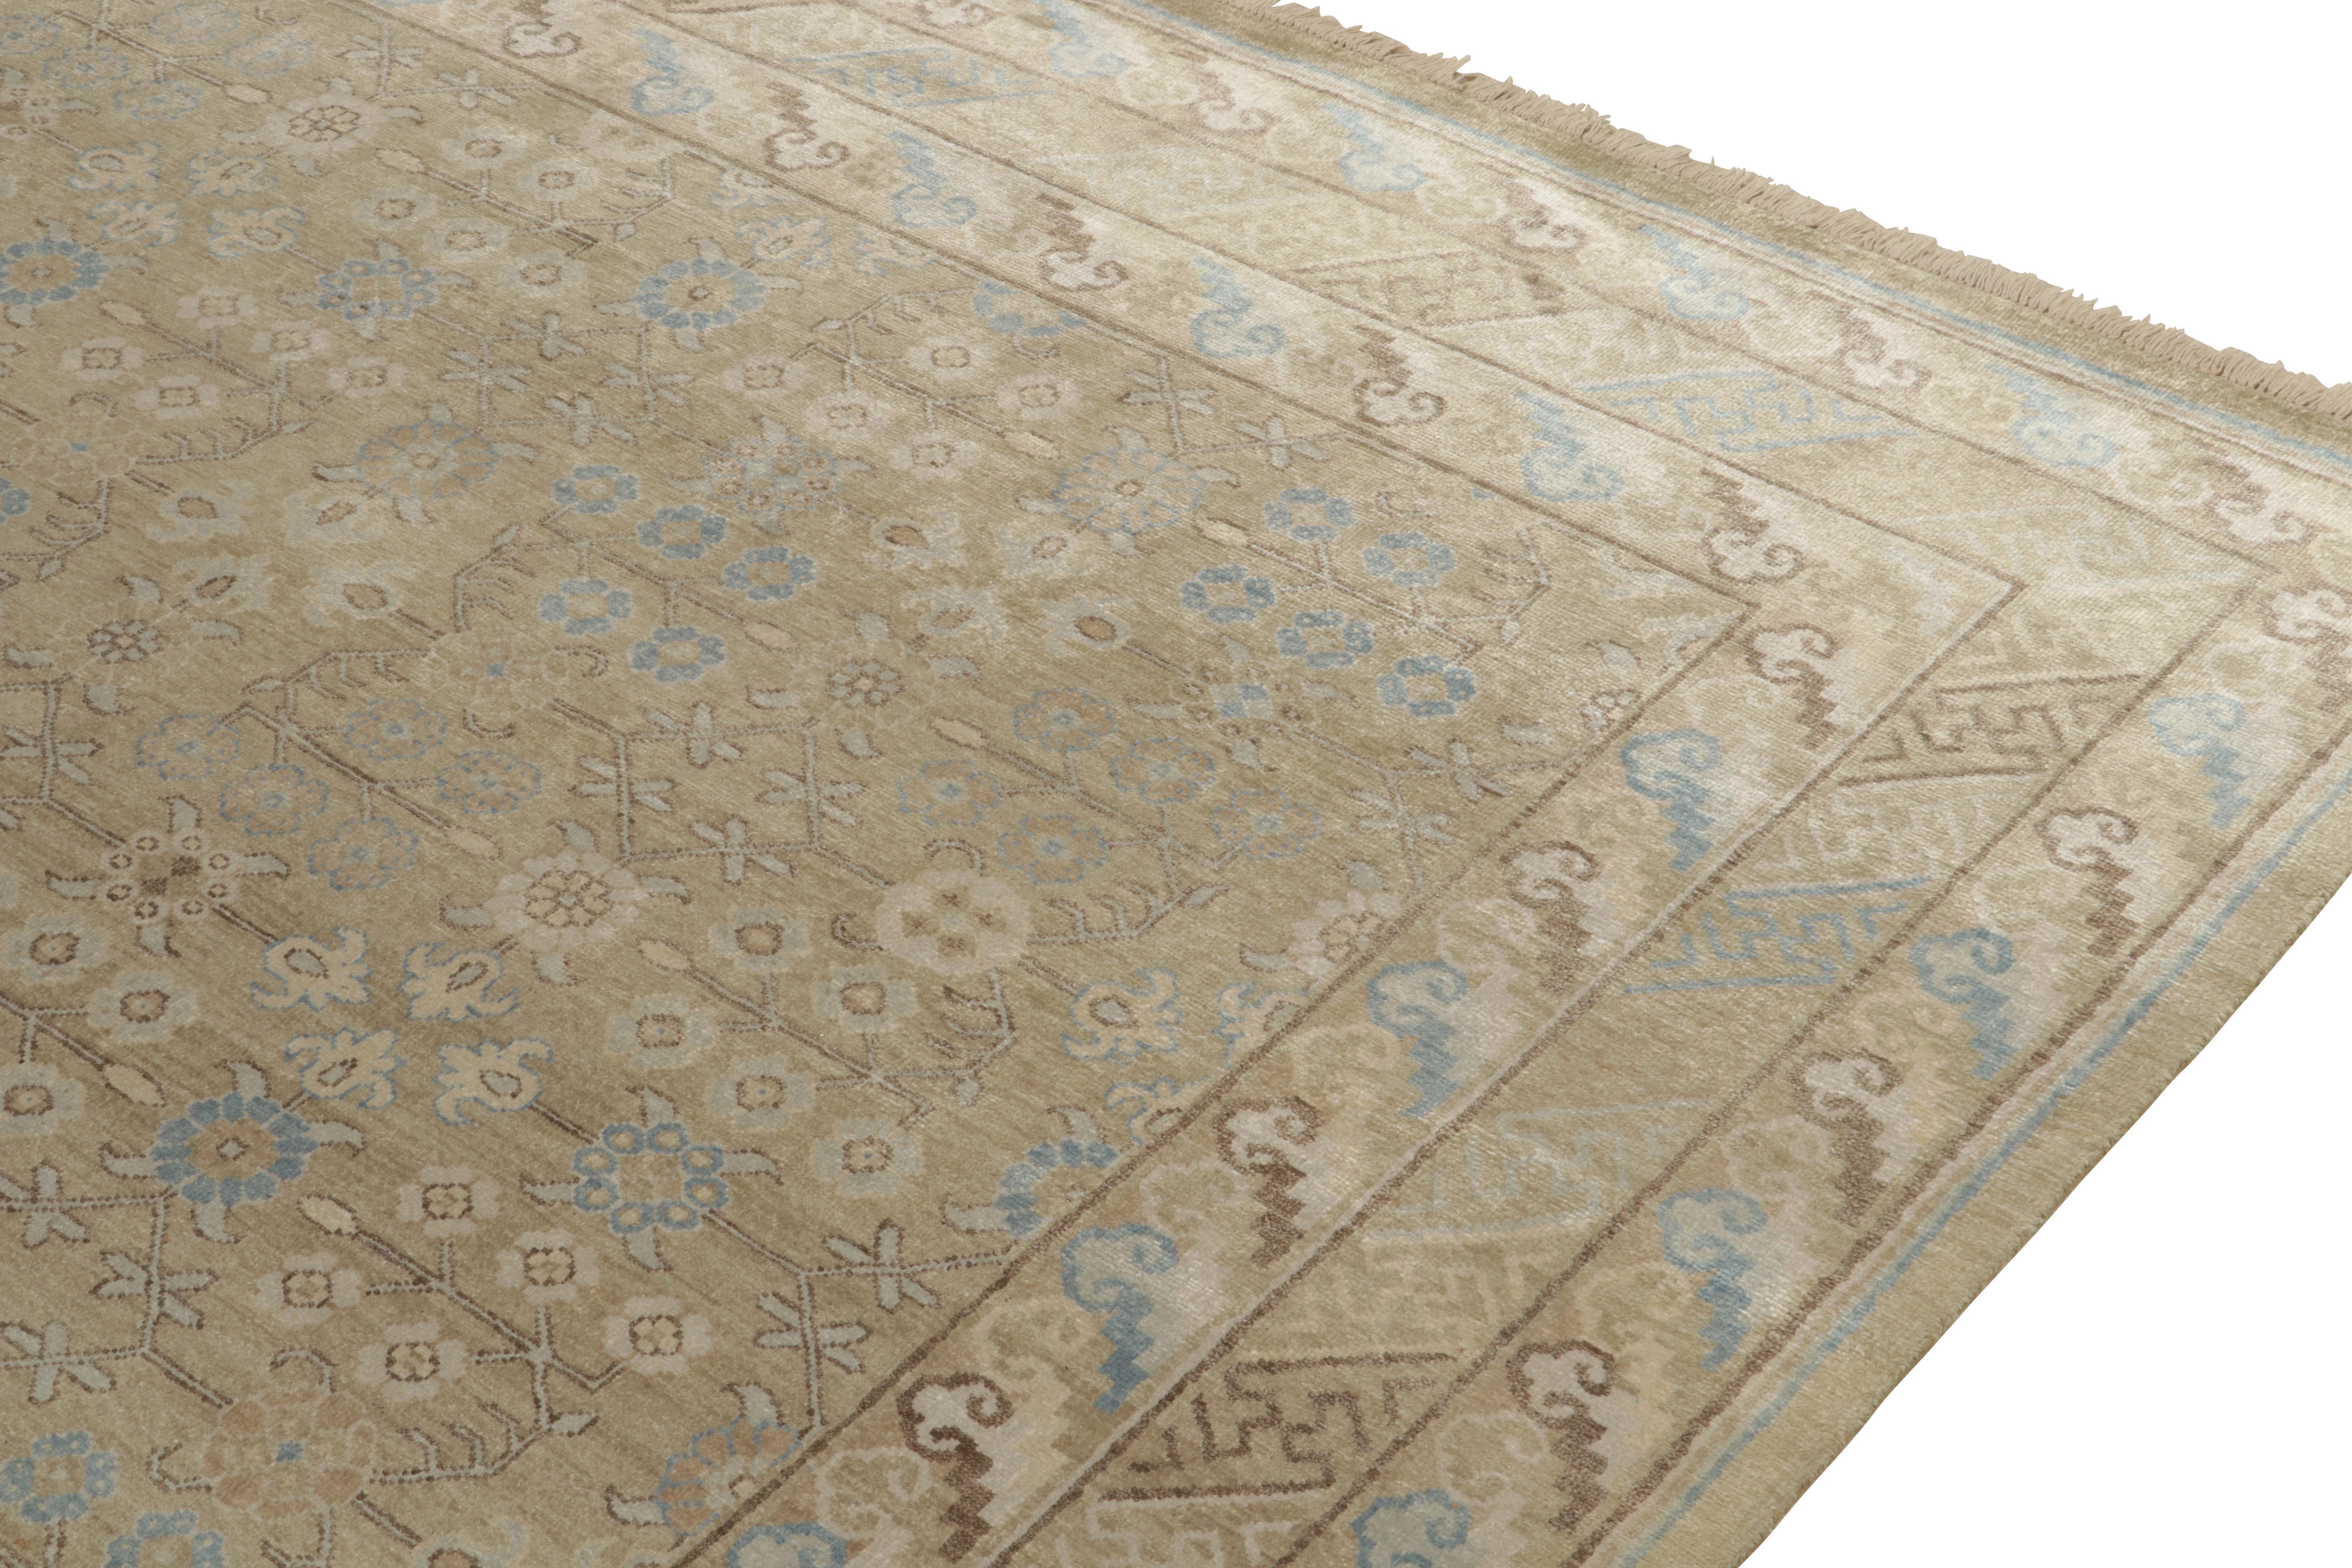 Rug & Kilim’s Khotan Style Rug in Gold, Beige-Brown and Blue Patterns In New Condition For Sale In Long Island City, NY